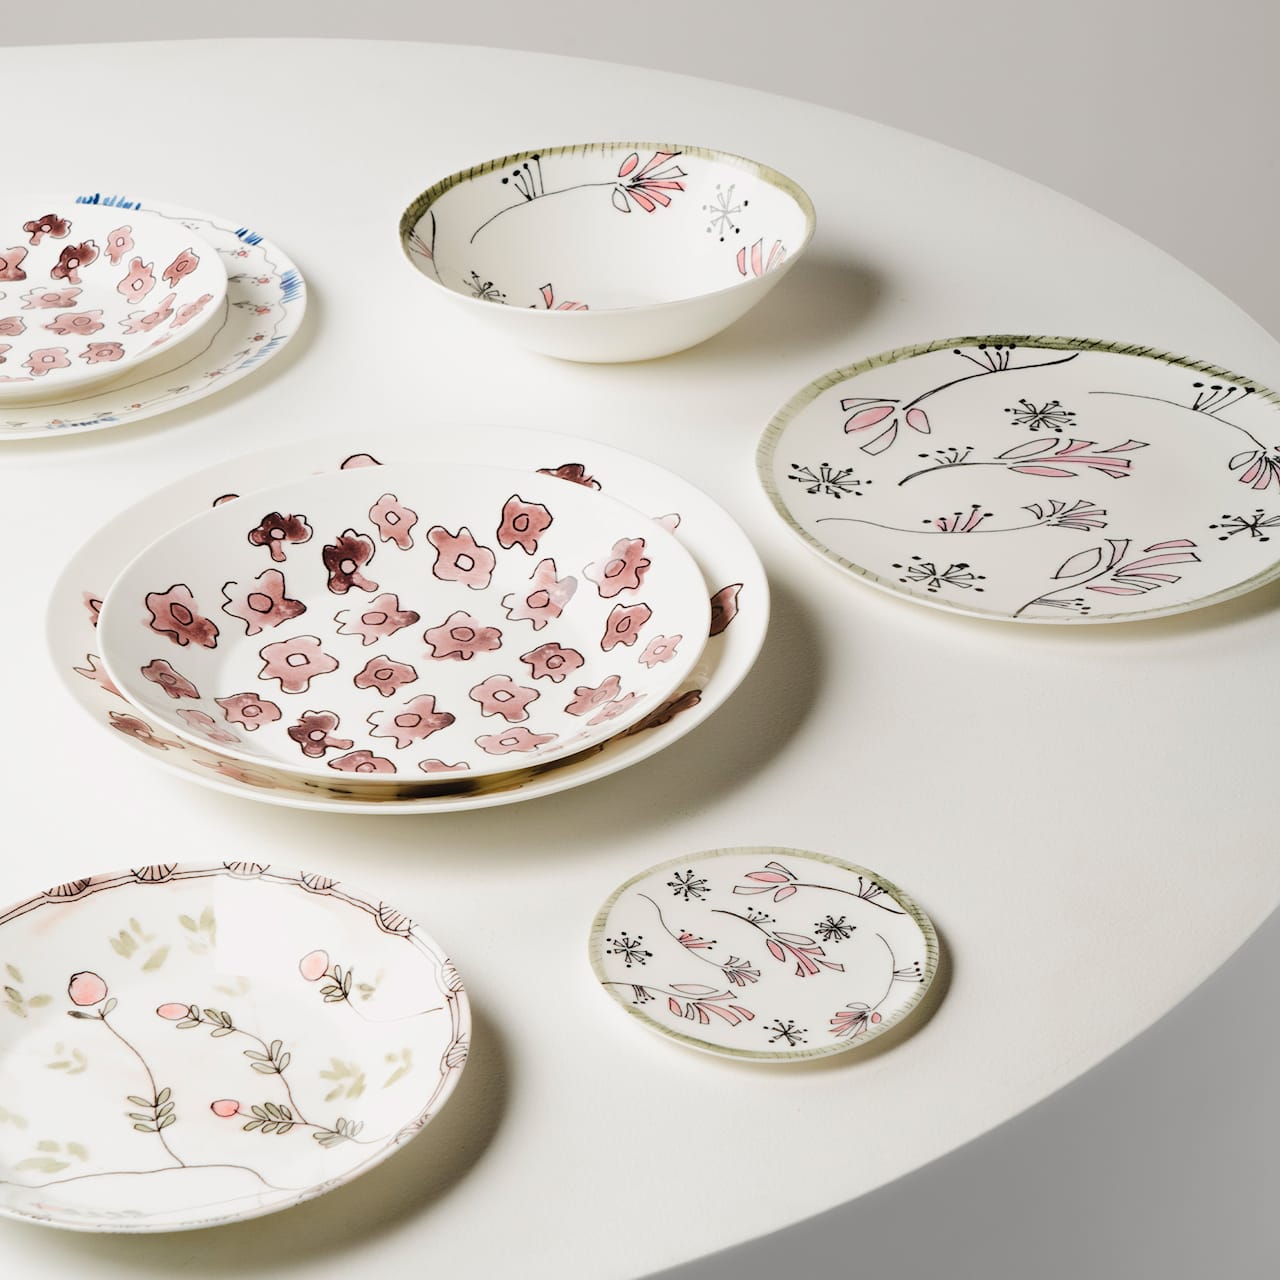 Plate S Fiore Rosa - Set of 2